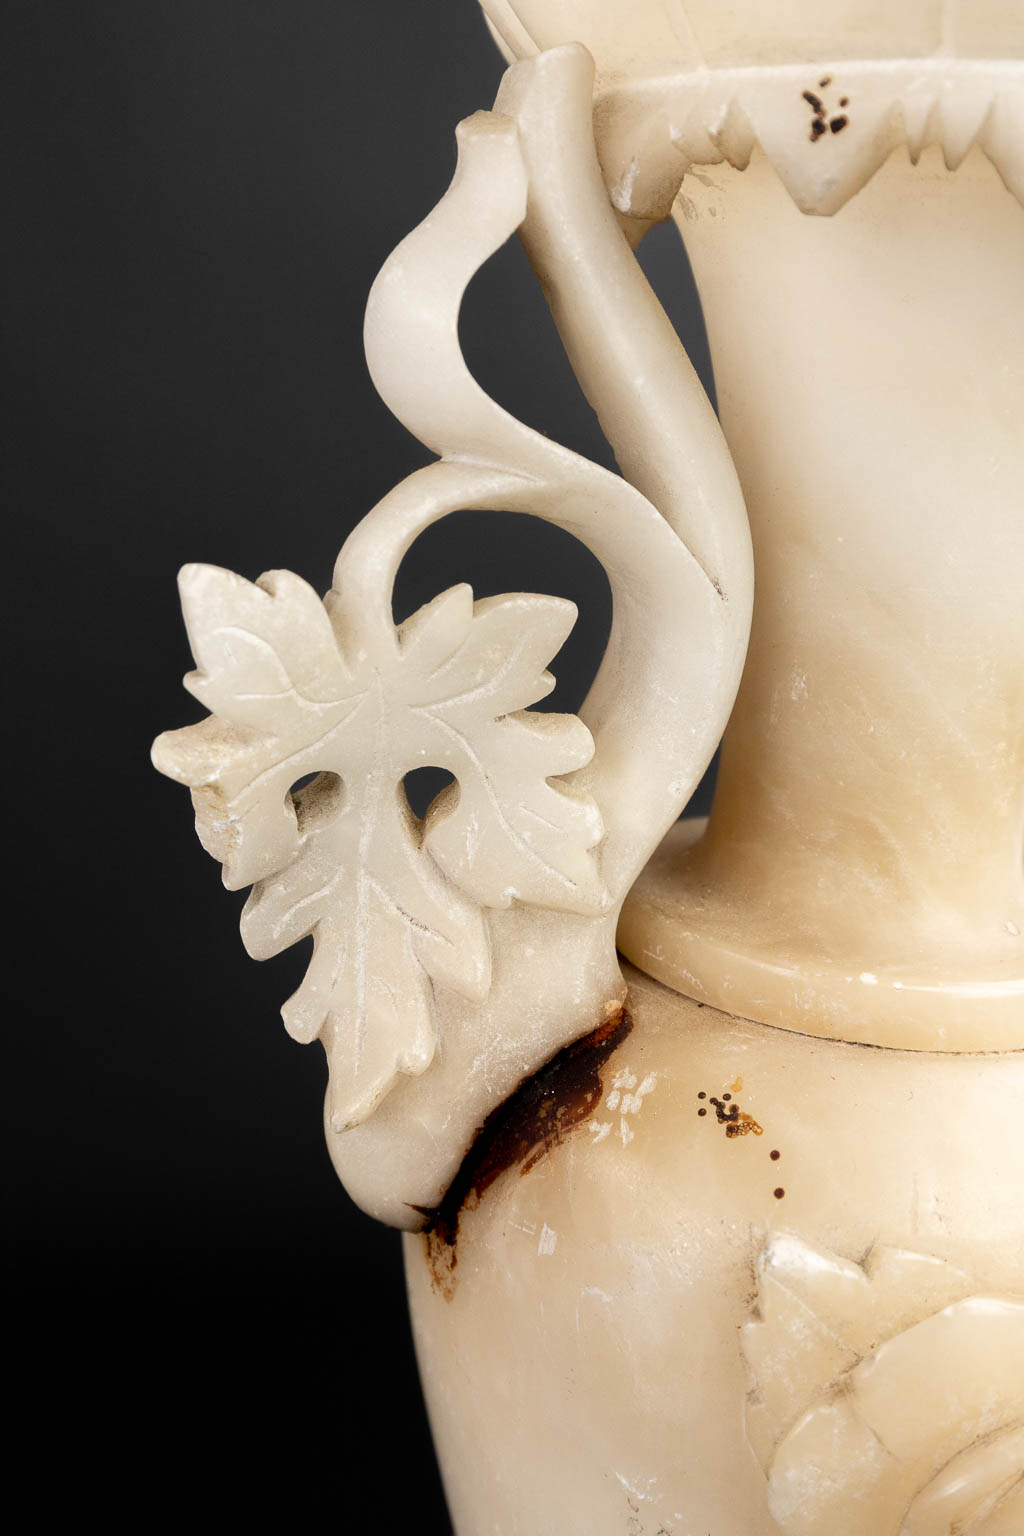 A collection of 5 vases made of alabaster and decorated with grapevines. (H:45cm)